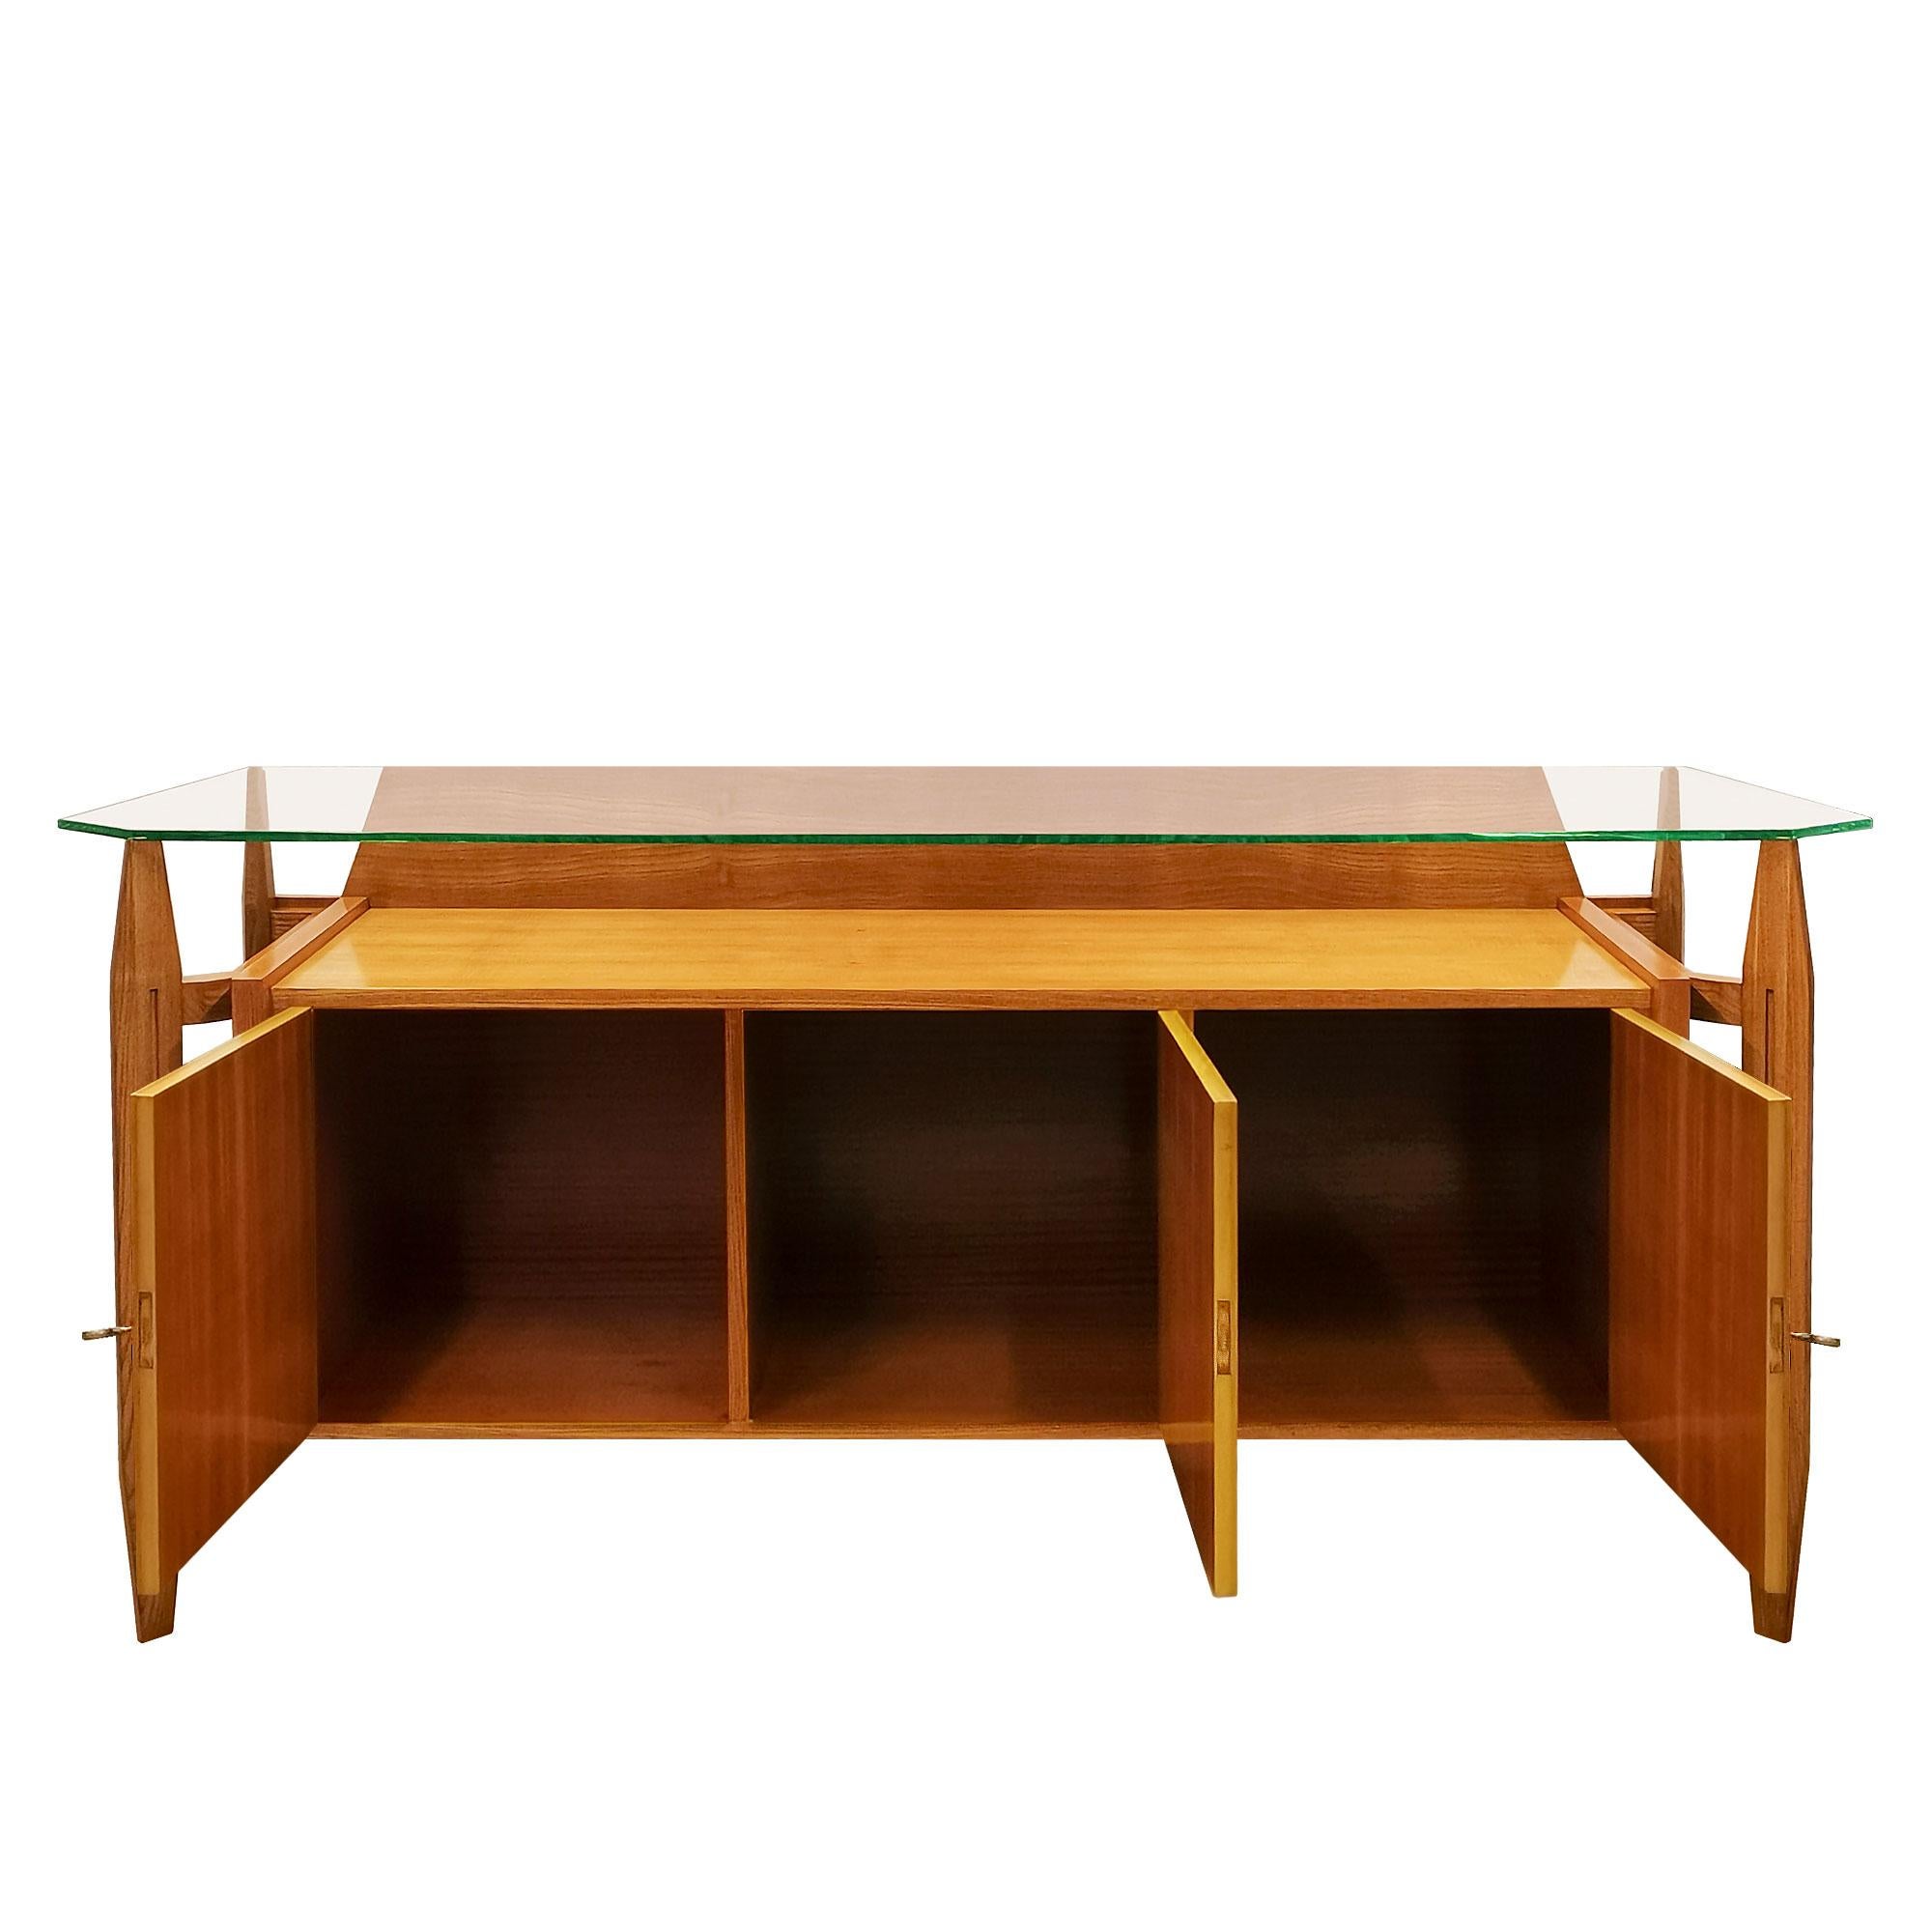 Mid-20th Century Mid-Century Modern Three-Door Sideboard in Ash Wood and Glass on Top - Italy For Sale